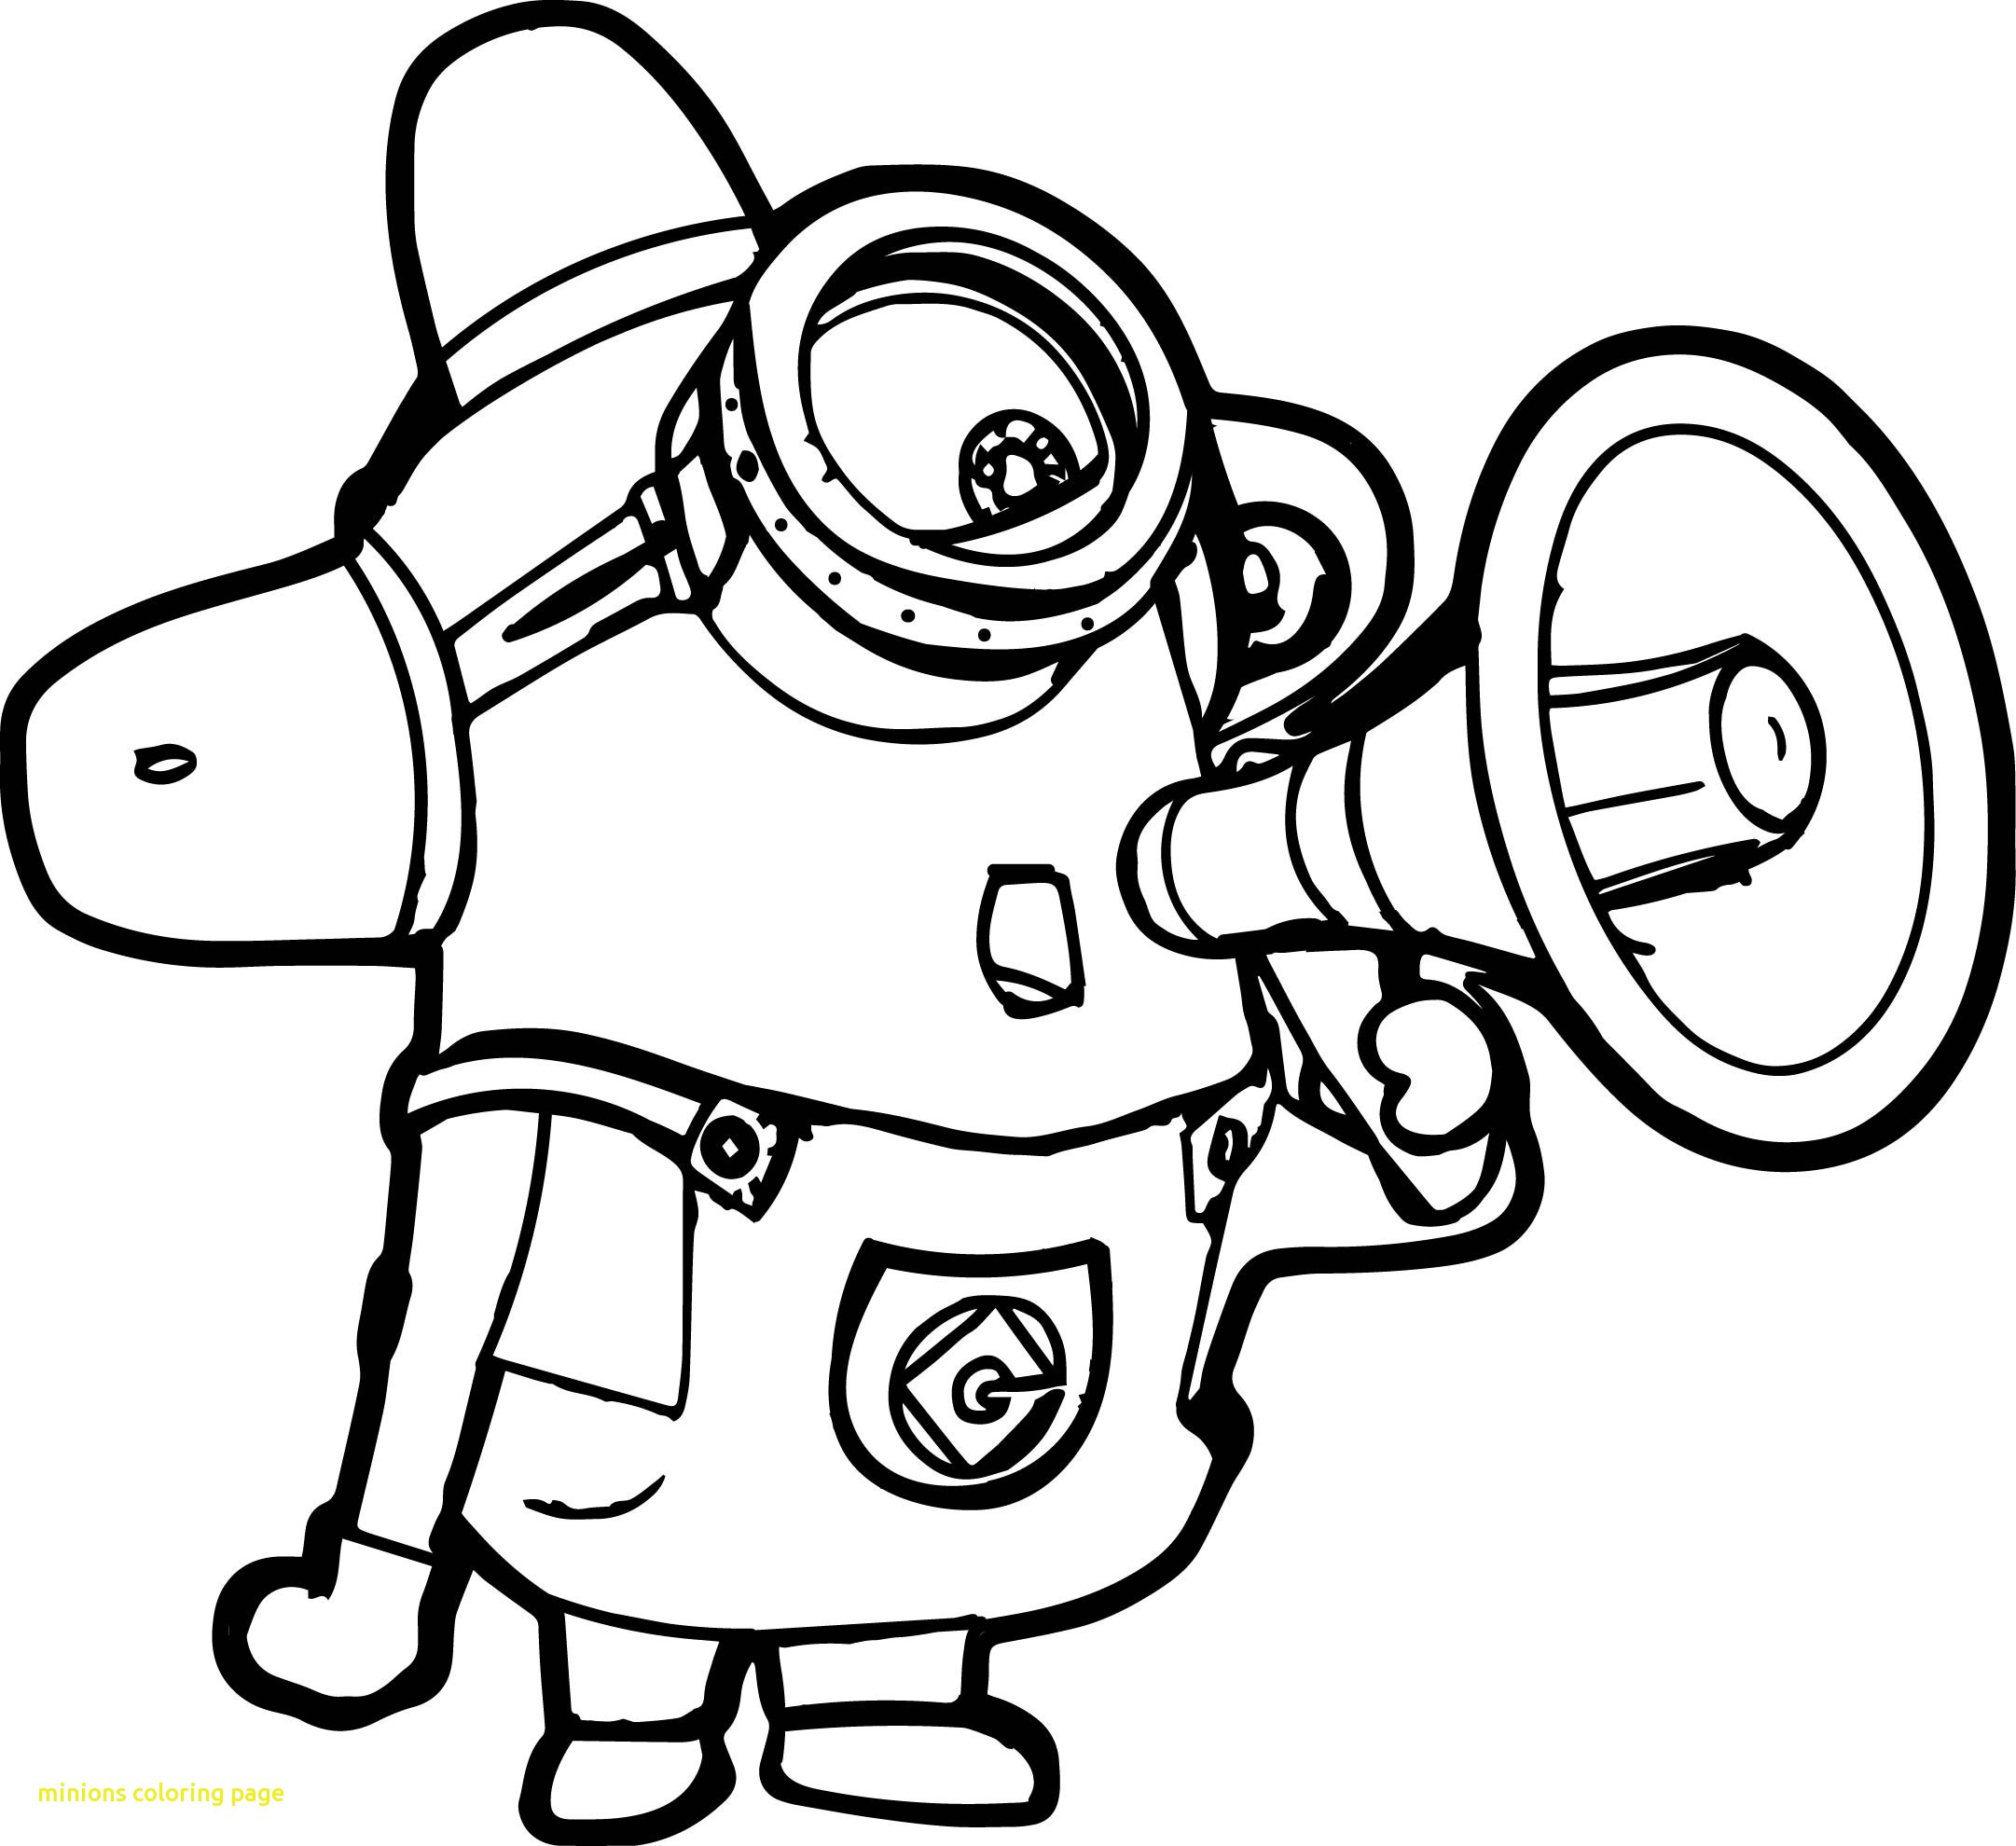 bob-the-minion-coloring-pages-at-getdrawings-free-download